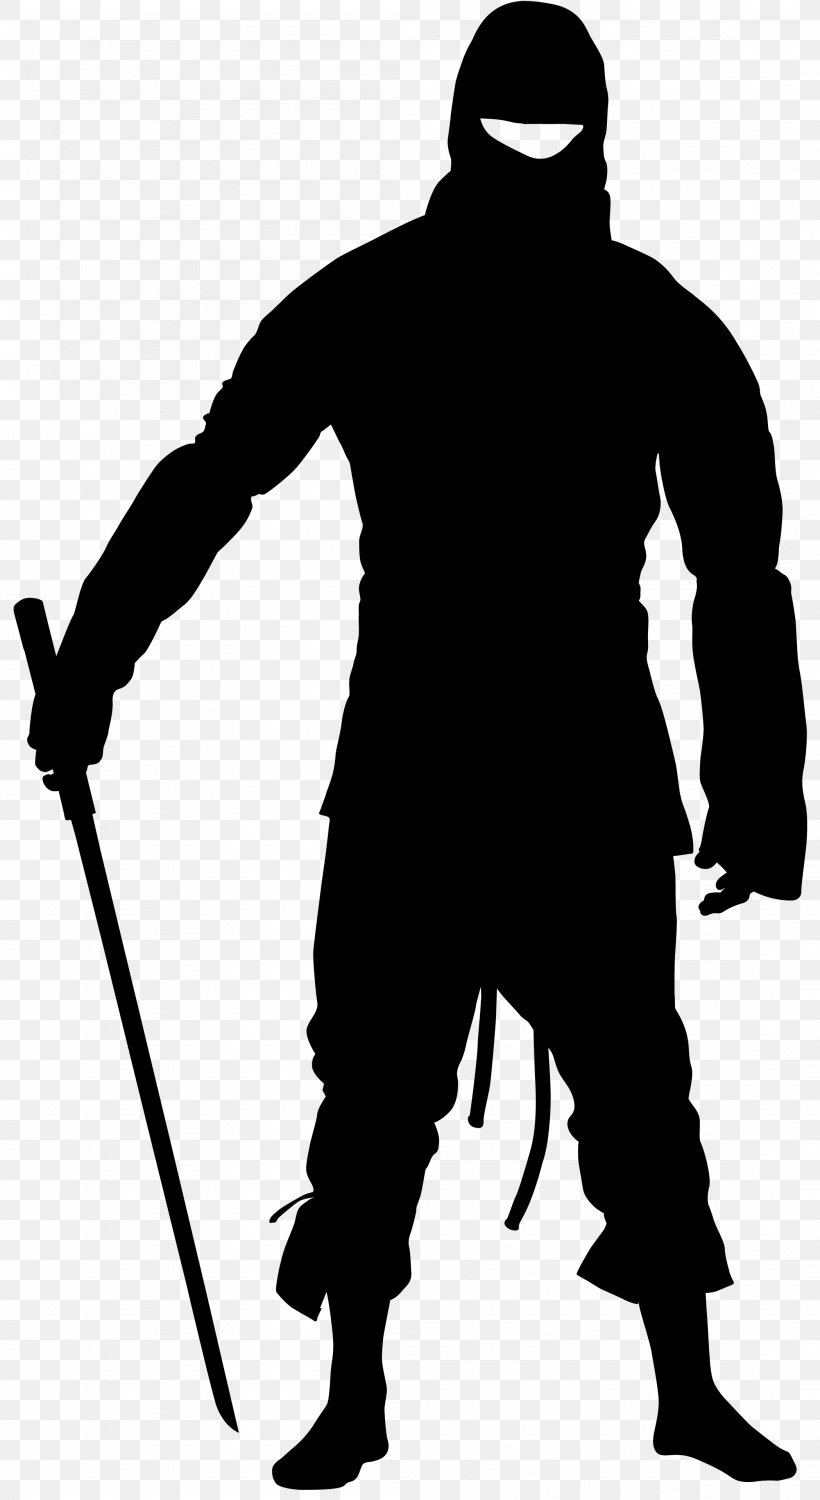 Silhouette Ninja Clip Art, PNG, 2098x3840px, Silhouette, Black, Black And White, Cartoon, Fictional Character Download Free